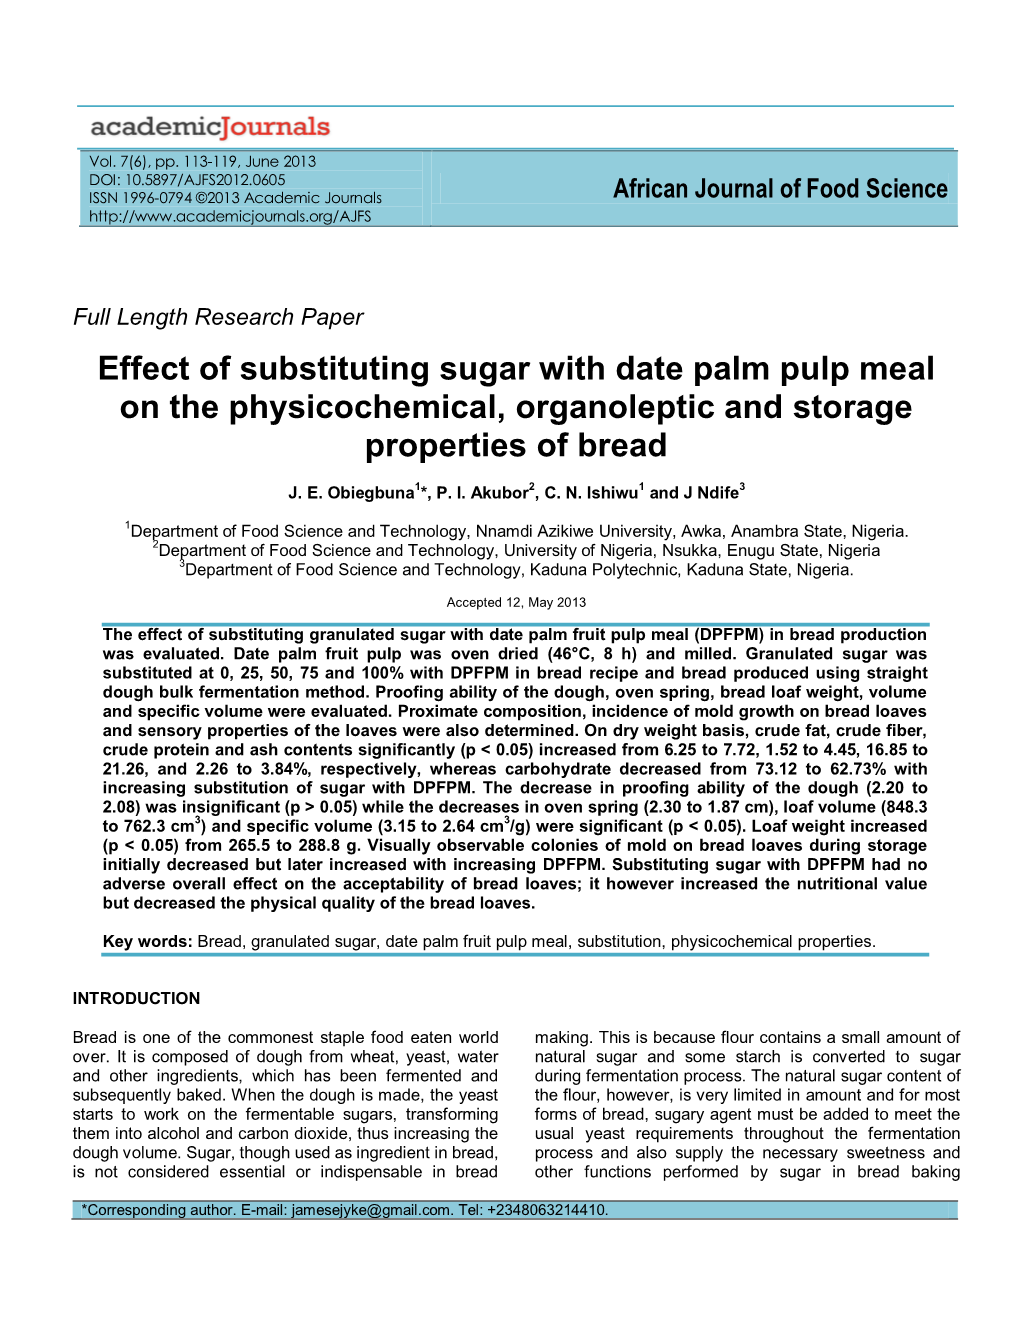 Effect of Substituting Sugar with Date Palm Pulp Meal on the Physicochemical, Organoleptic and Storage Properties of Bread